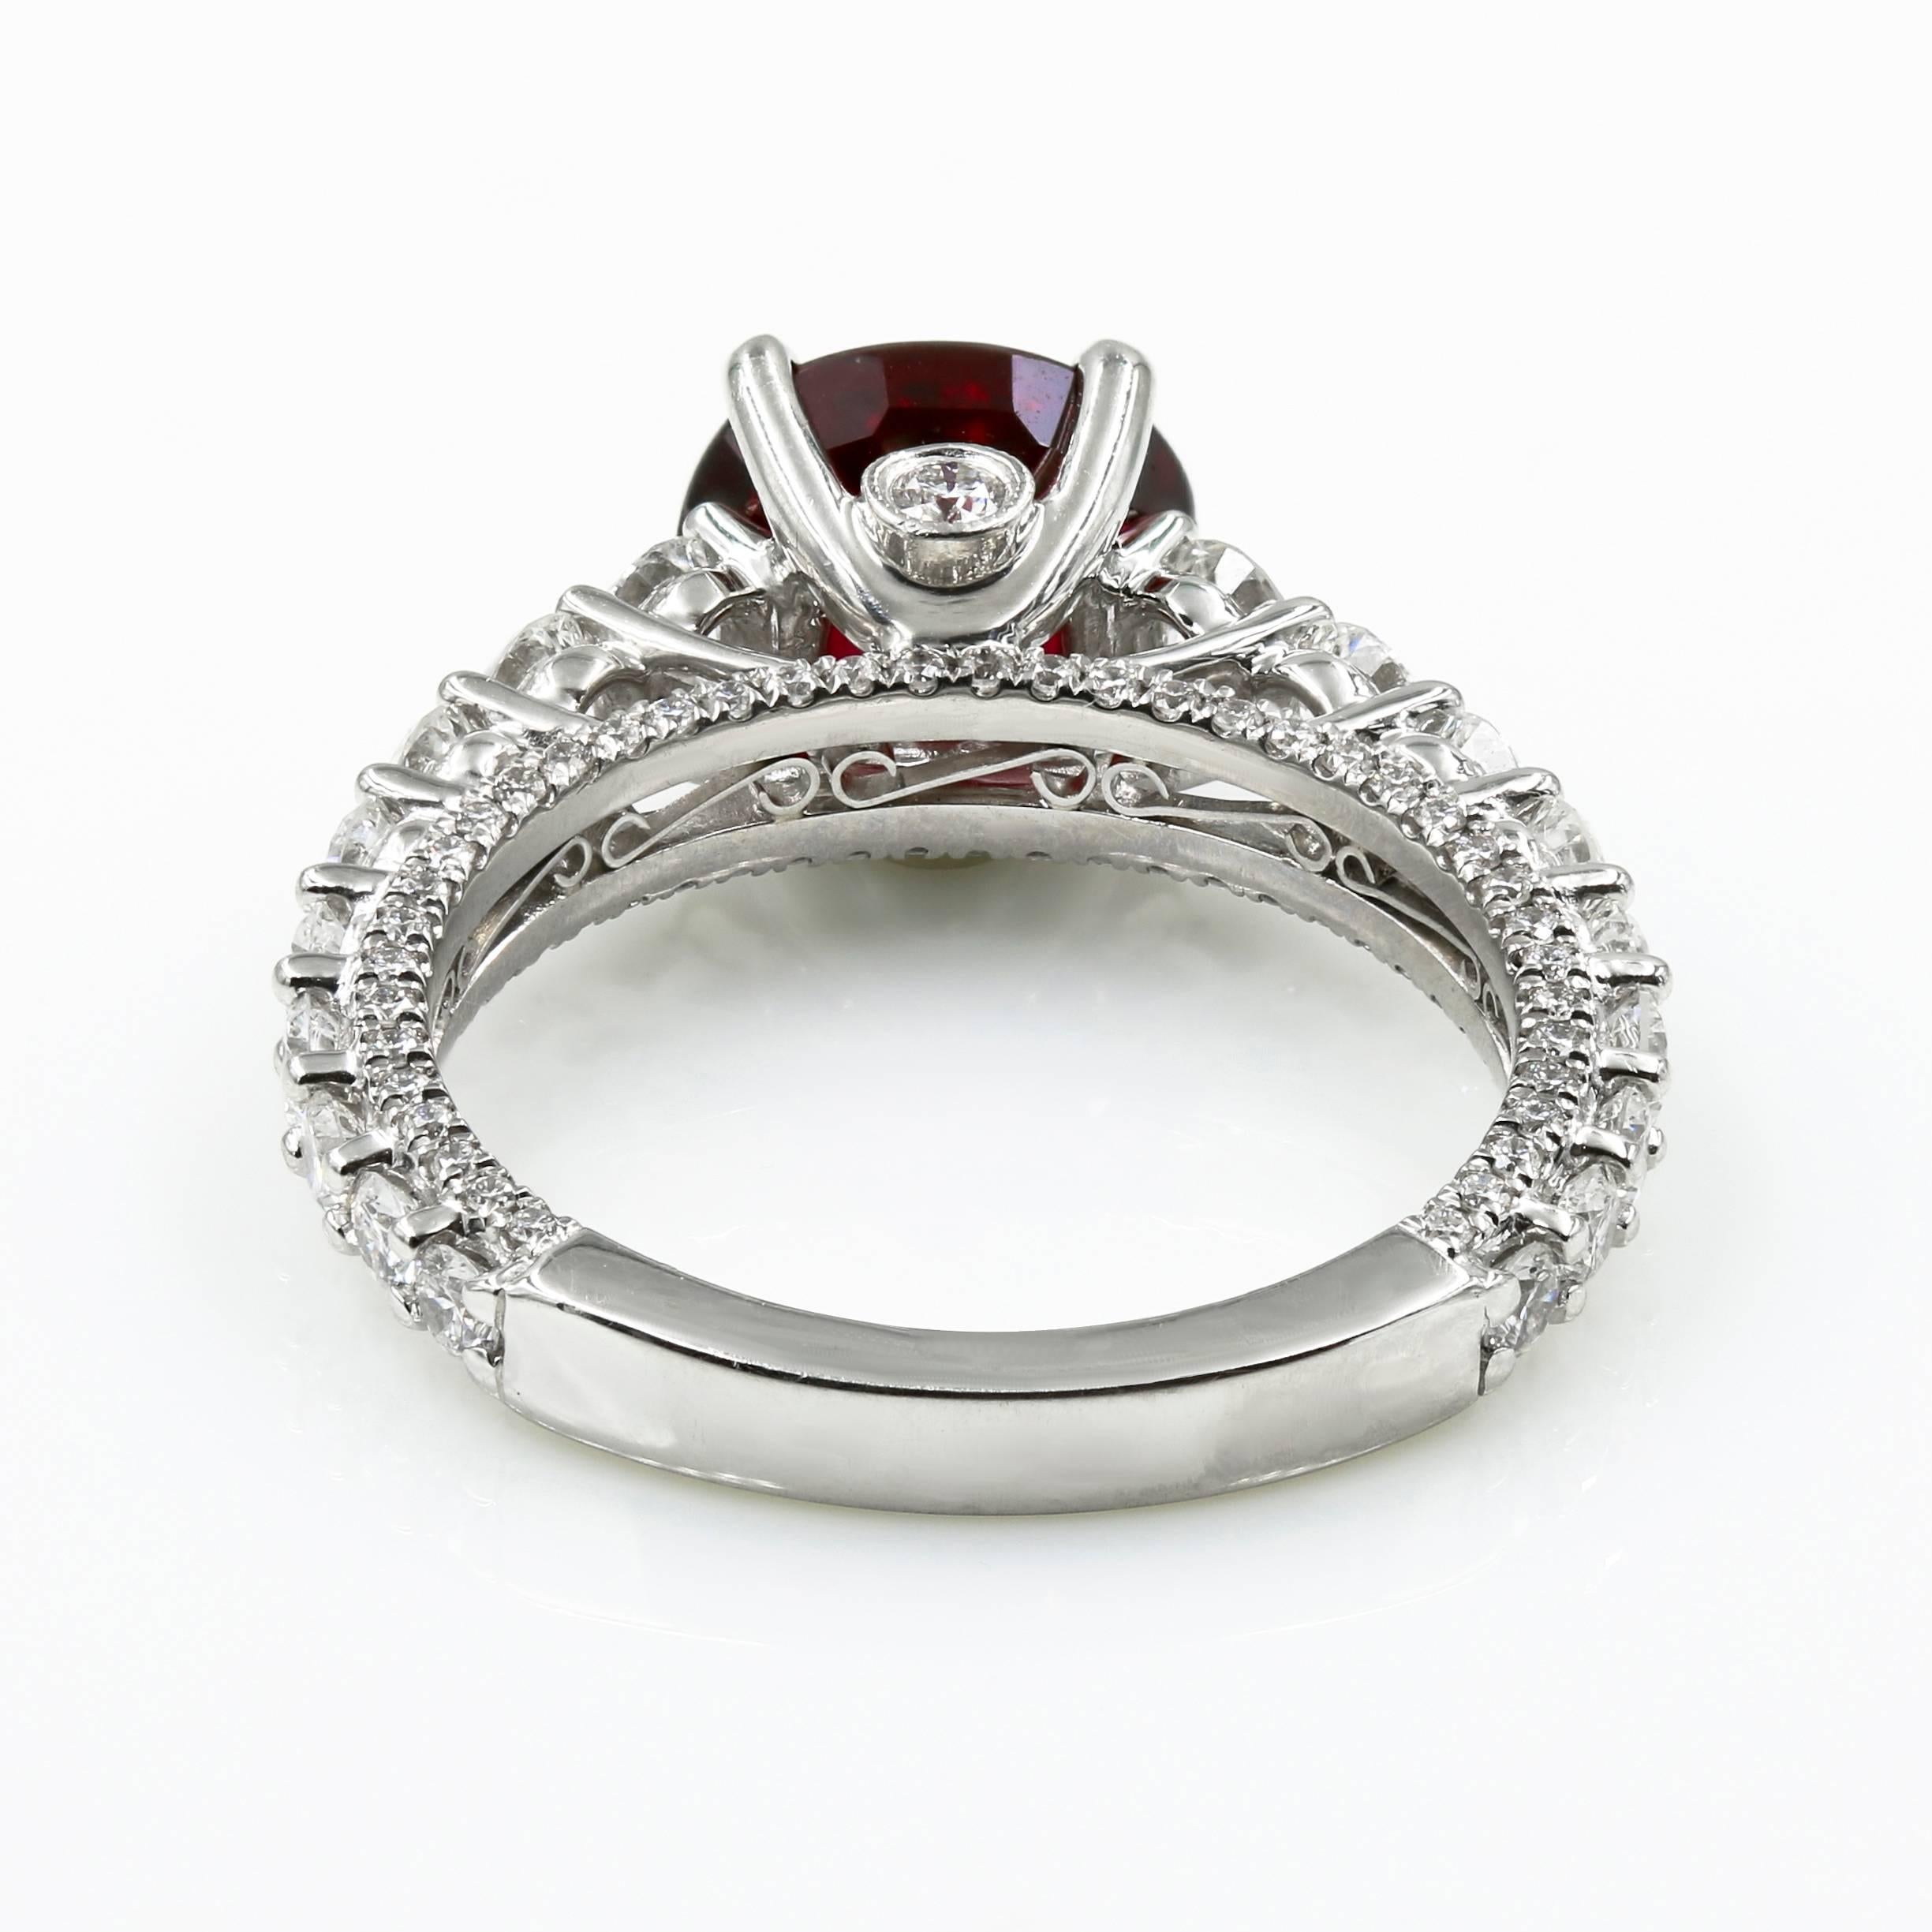 Oval Cut Exquisite AGL Certified 2.78 Carat Natural Ruby and Diamond Ring